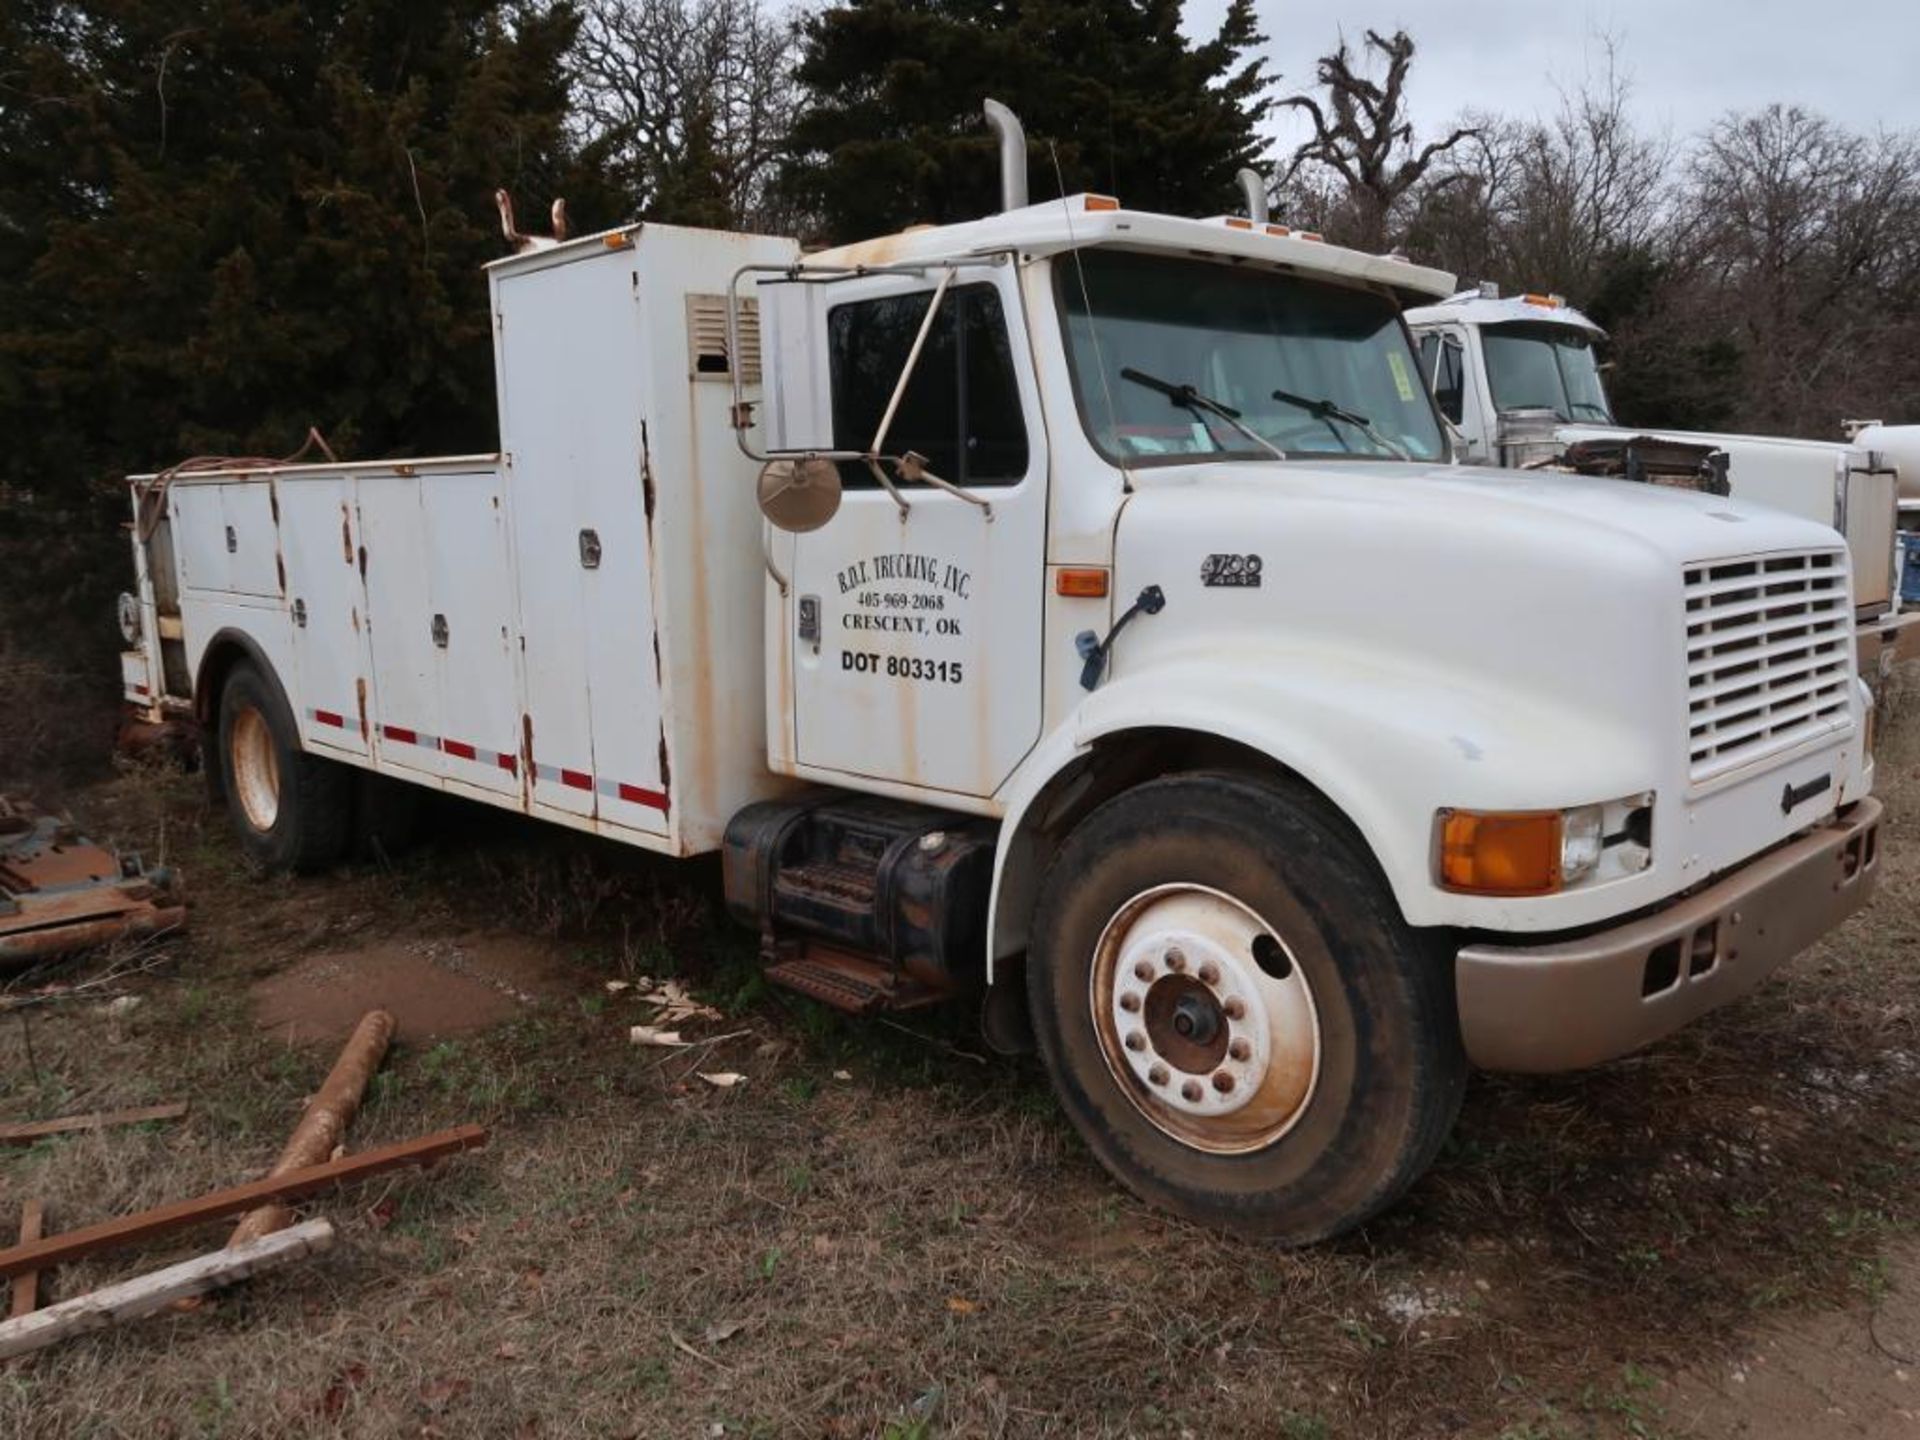 1998 International Model 4700, Utility Truck, (AS IS - NOT IN SERVICE - NO TITLE), VIN: 1HTSCABM8WHS - Image 2 of 7